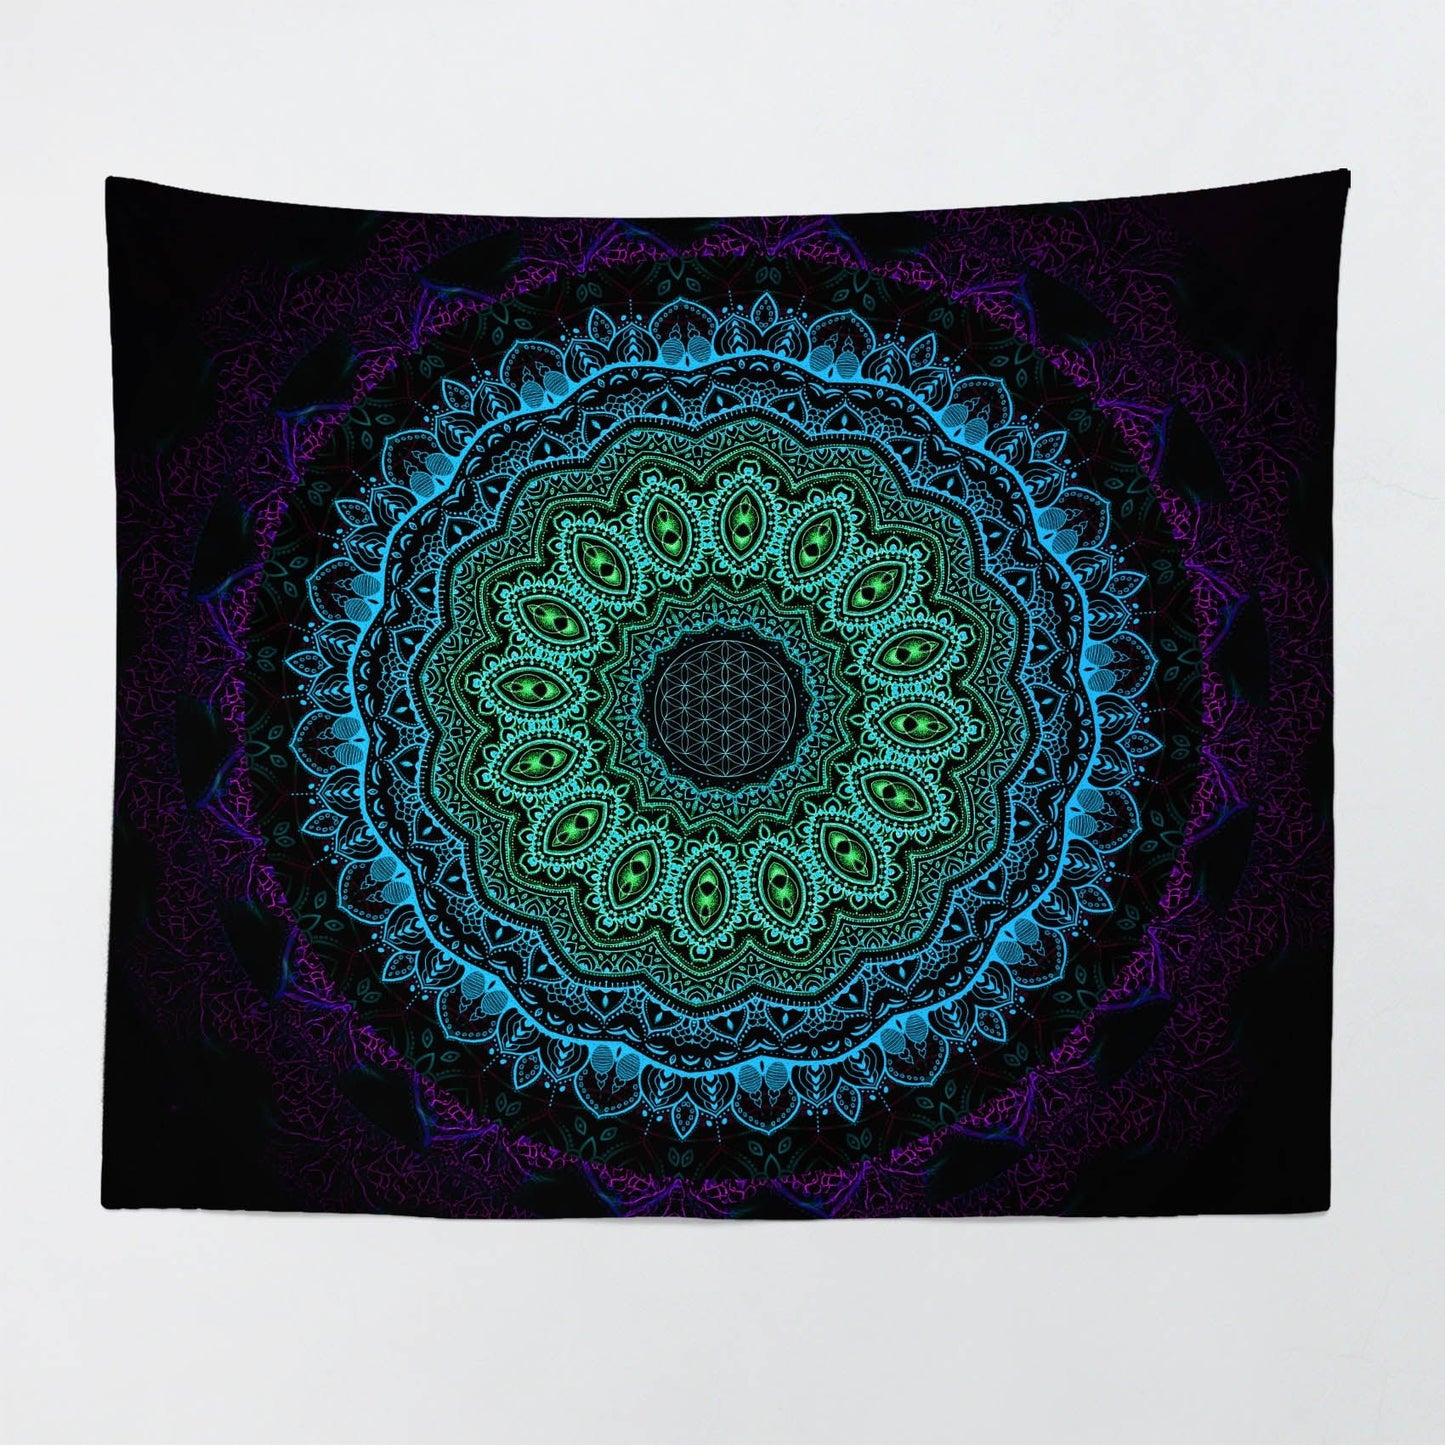 Balance And Unity - Visionary Tapestries